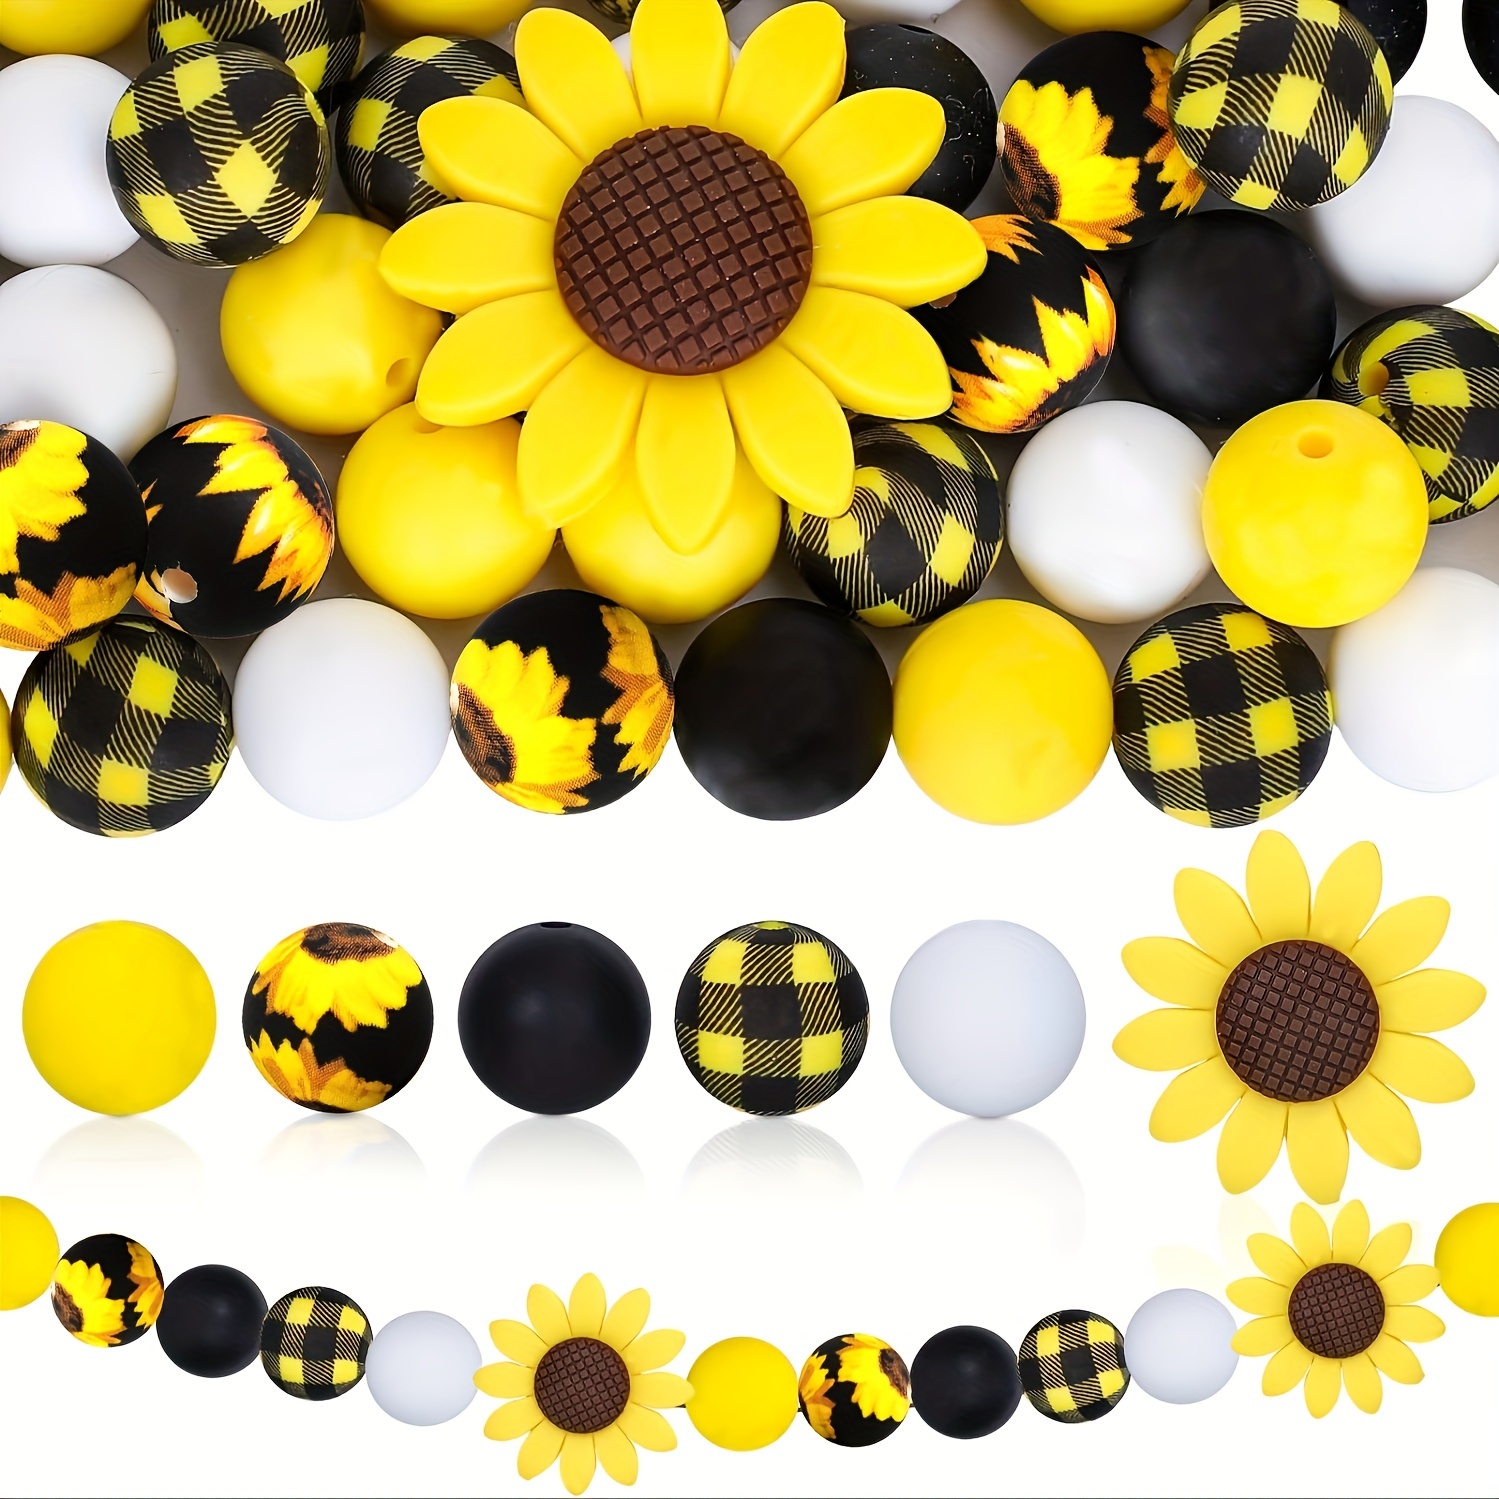 

26pcs Sunflower Pattern Silicone Round Beads, Sunflower Shaped Silicone Charms For Diy Necklace Bracelet Jewelry Making